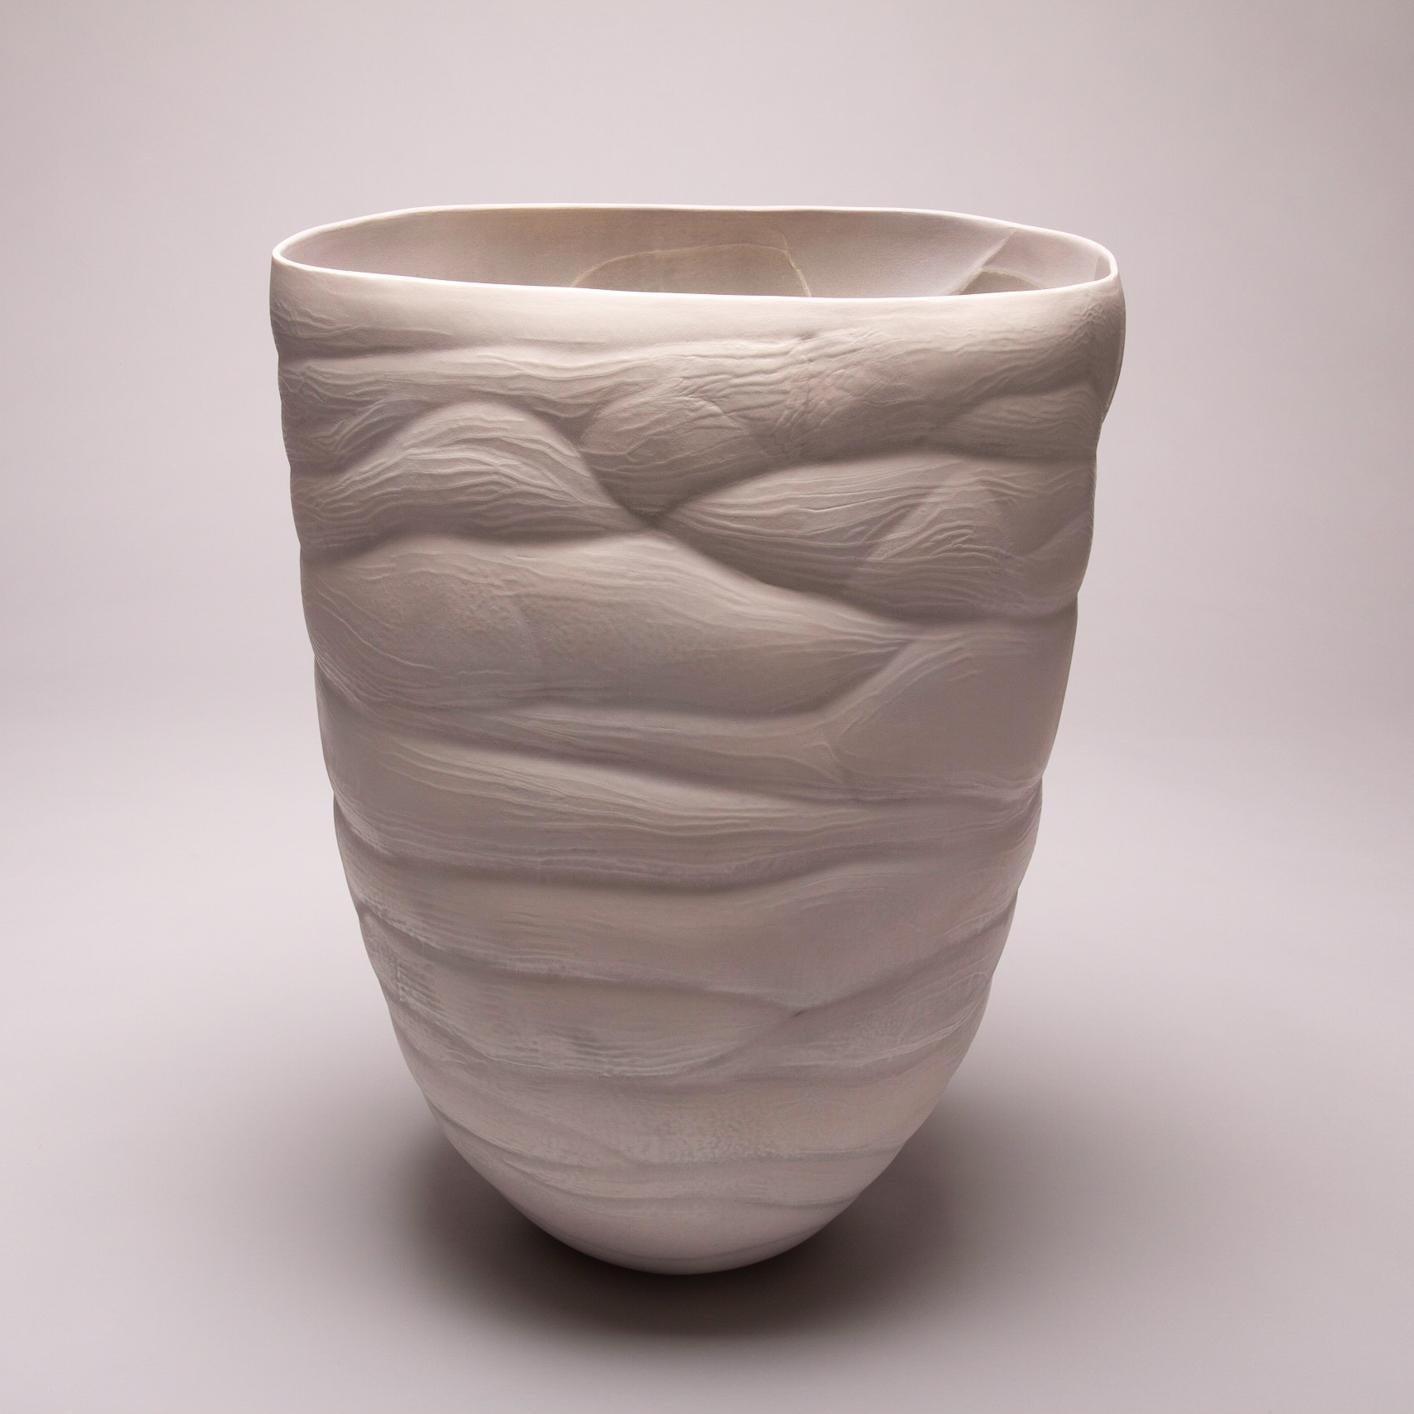 Holding Space - intricate, nature-inspired, hand-shaped porcelain sculpture - Sculpture by Paula Murray